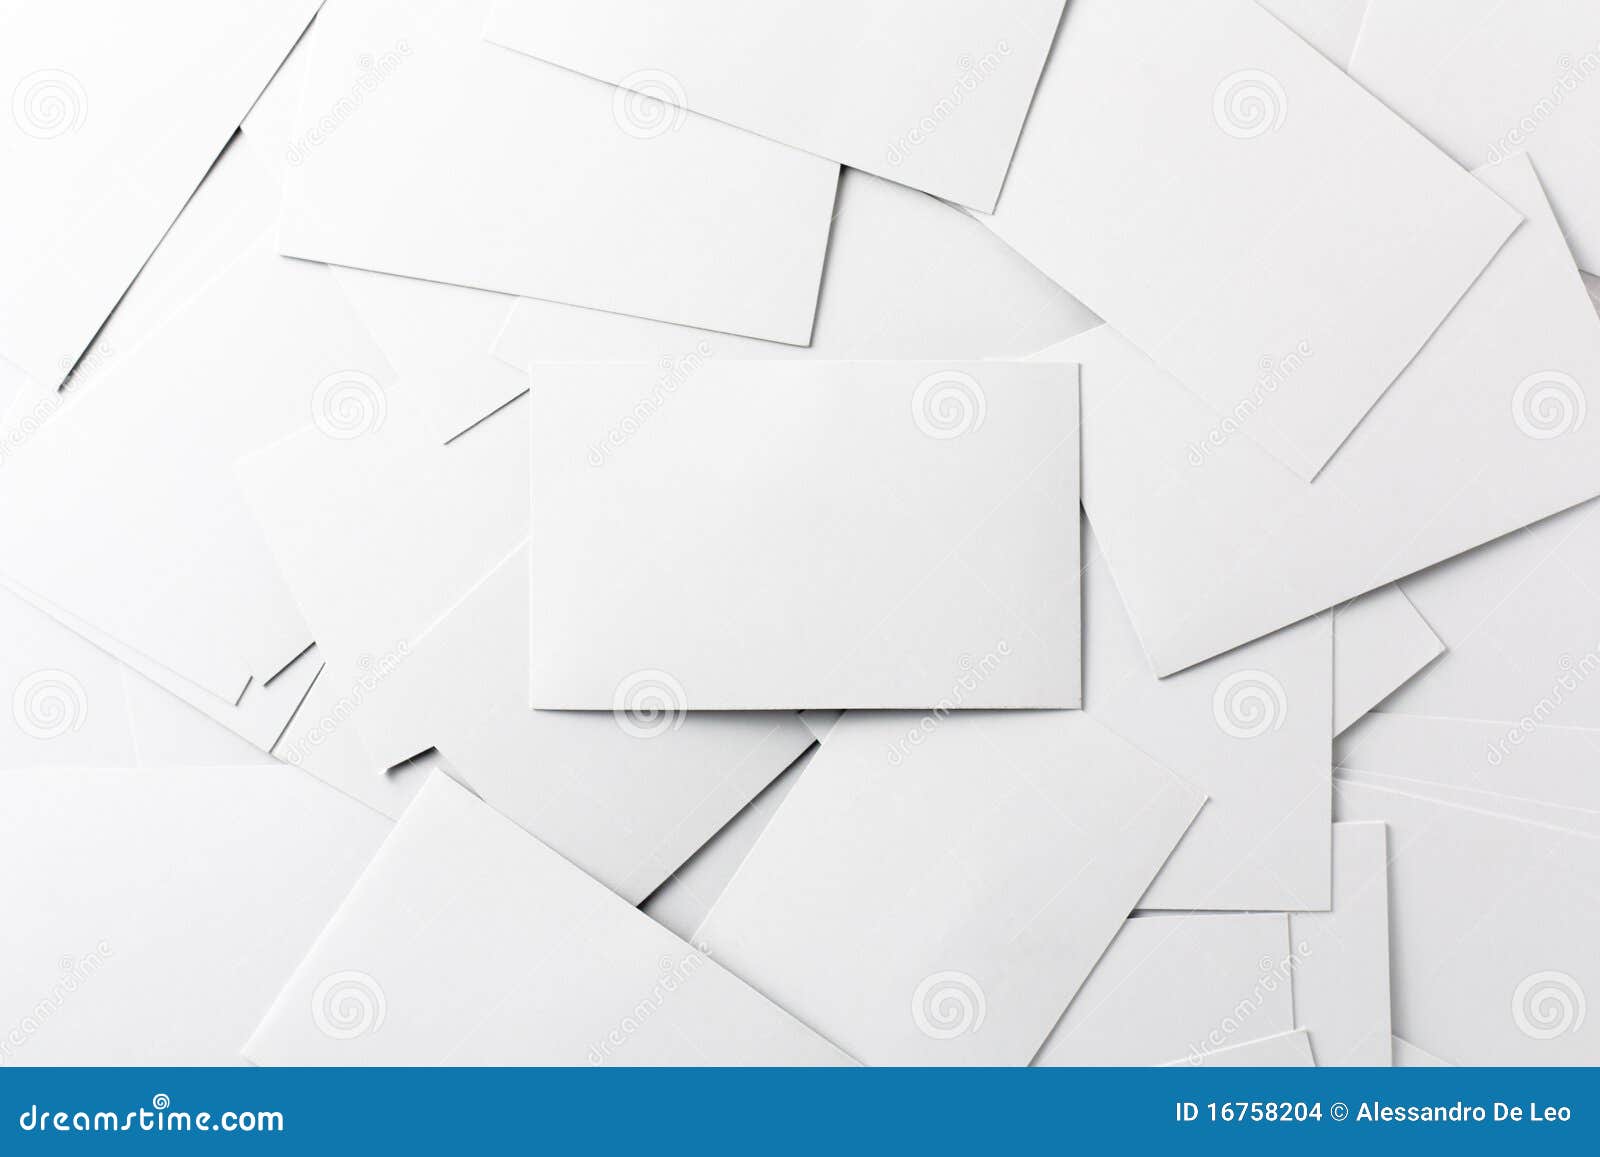 empty business cards 5